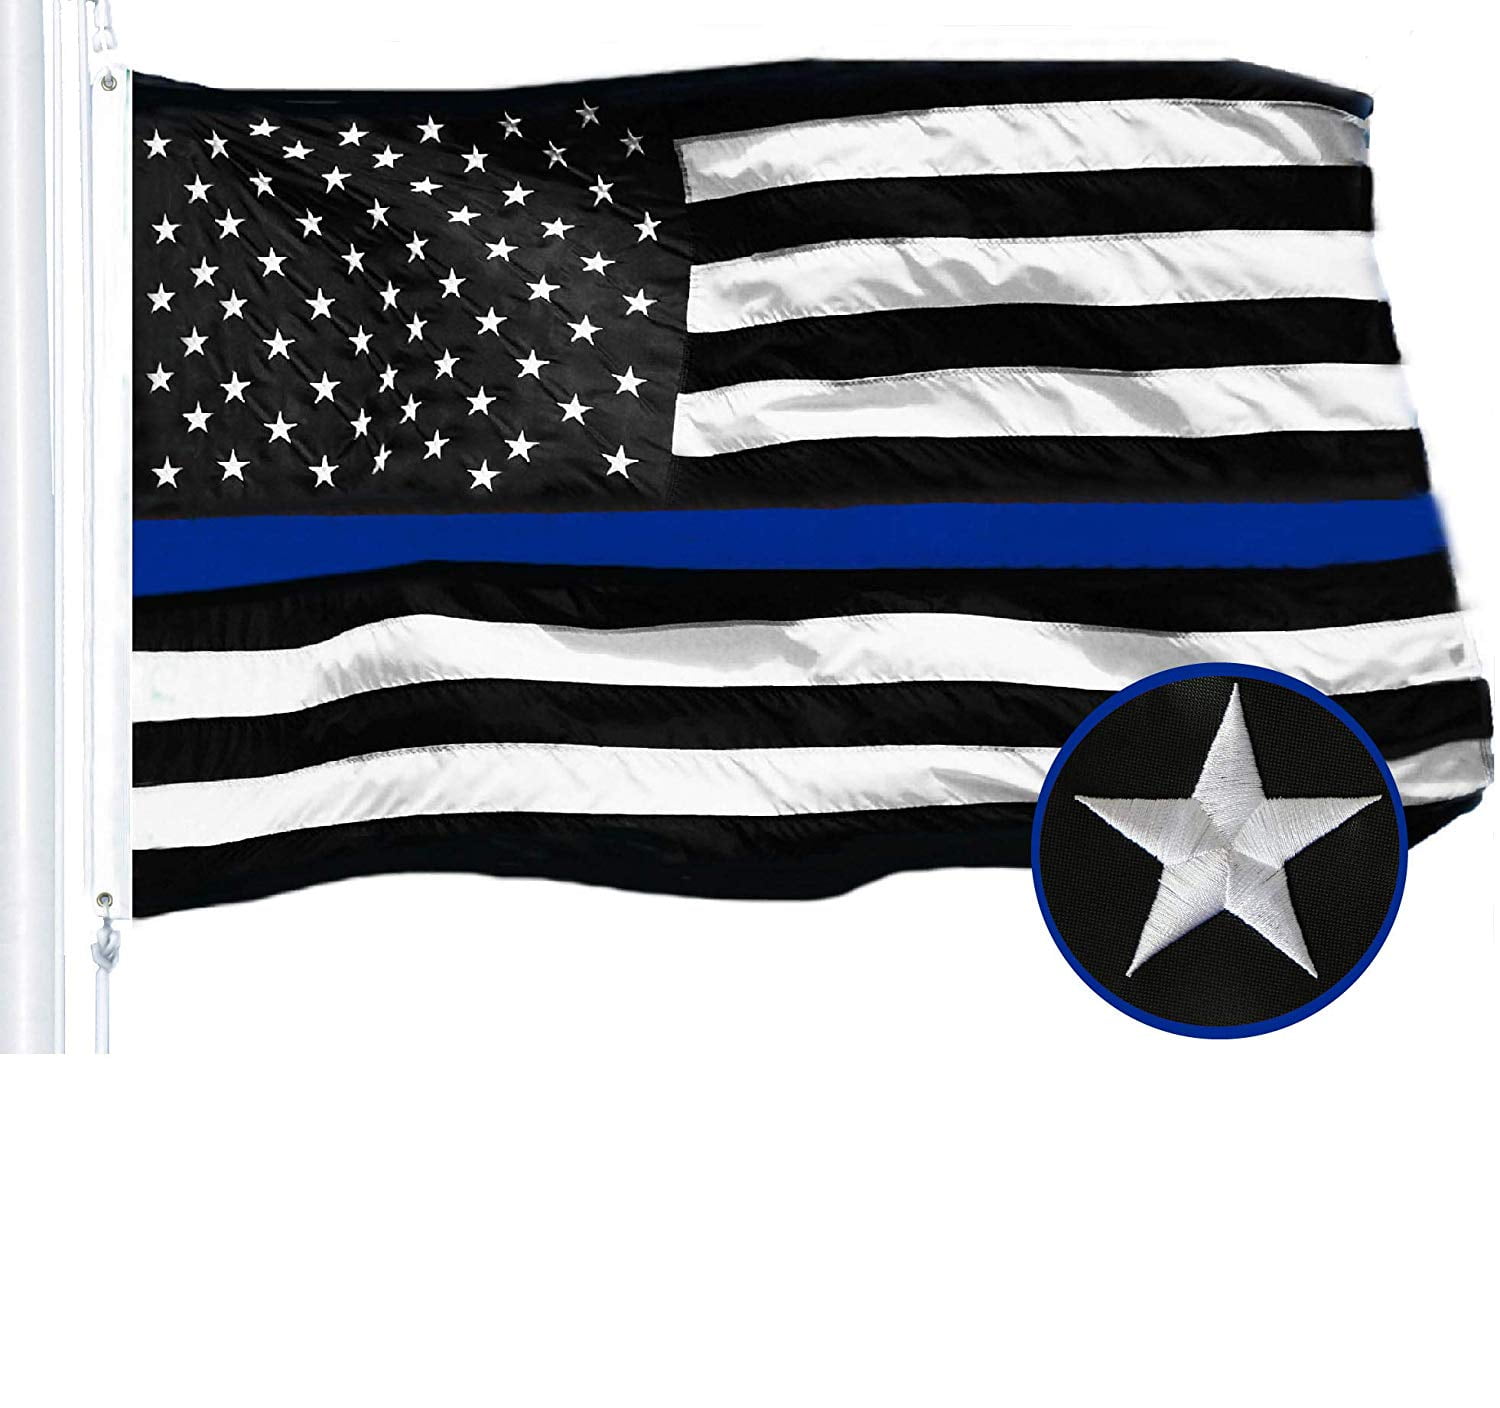 Embroidered Stars,Heavy Duty Durable Nylon,Sewn Stripes,Brass Grommets,Black White Blue US USA Police Flag-Honoring Law Enforcement Officers Freefy Thin Blue Line American Flag 4x6 ft 